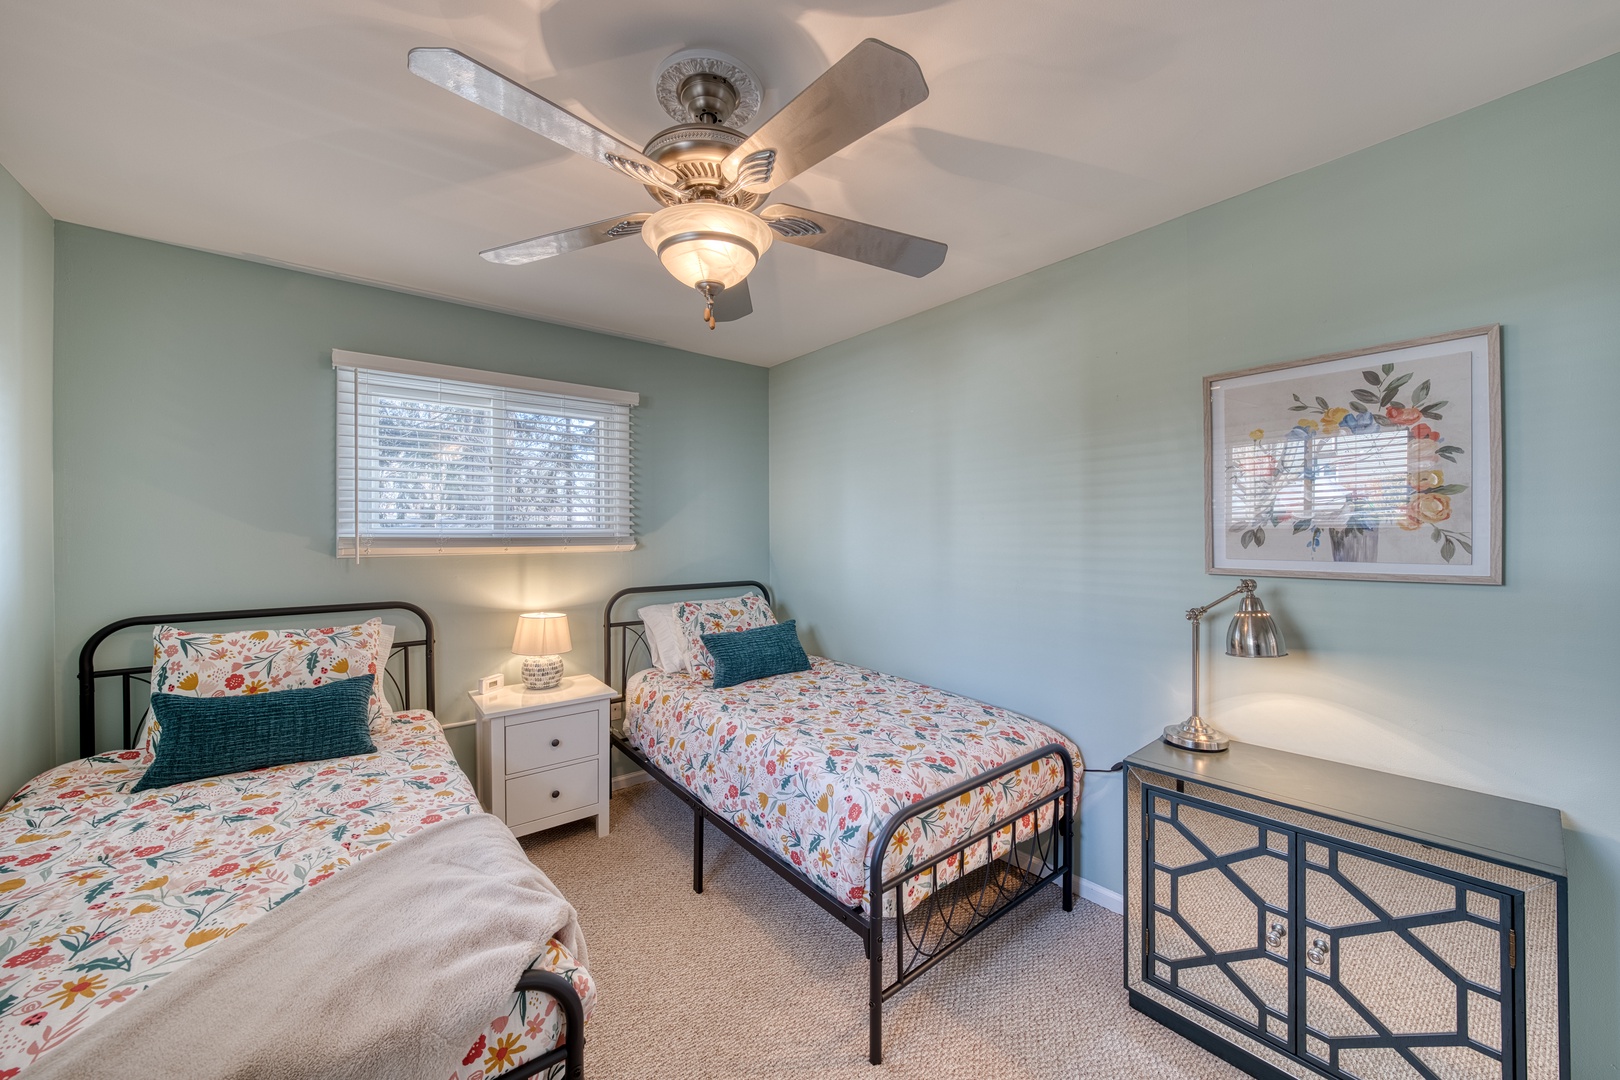 This charming bedroom retreat features a pair of plush twin beds